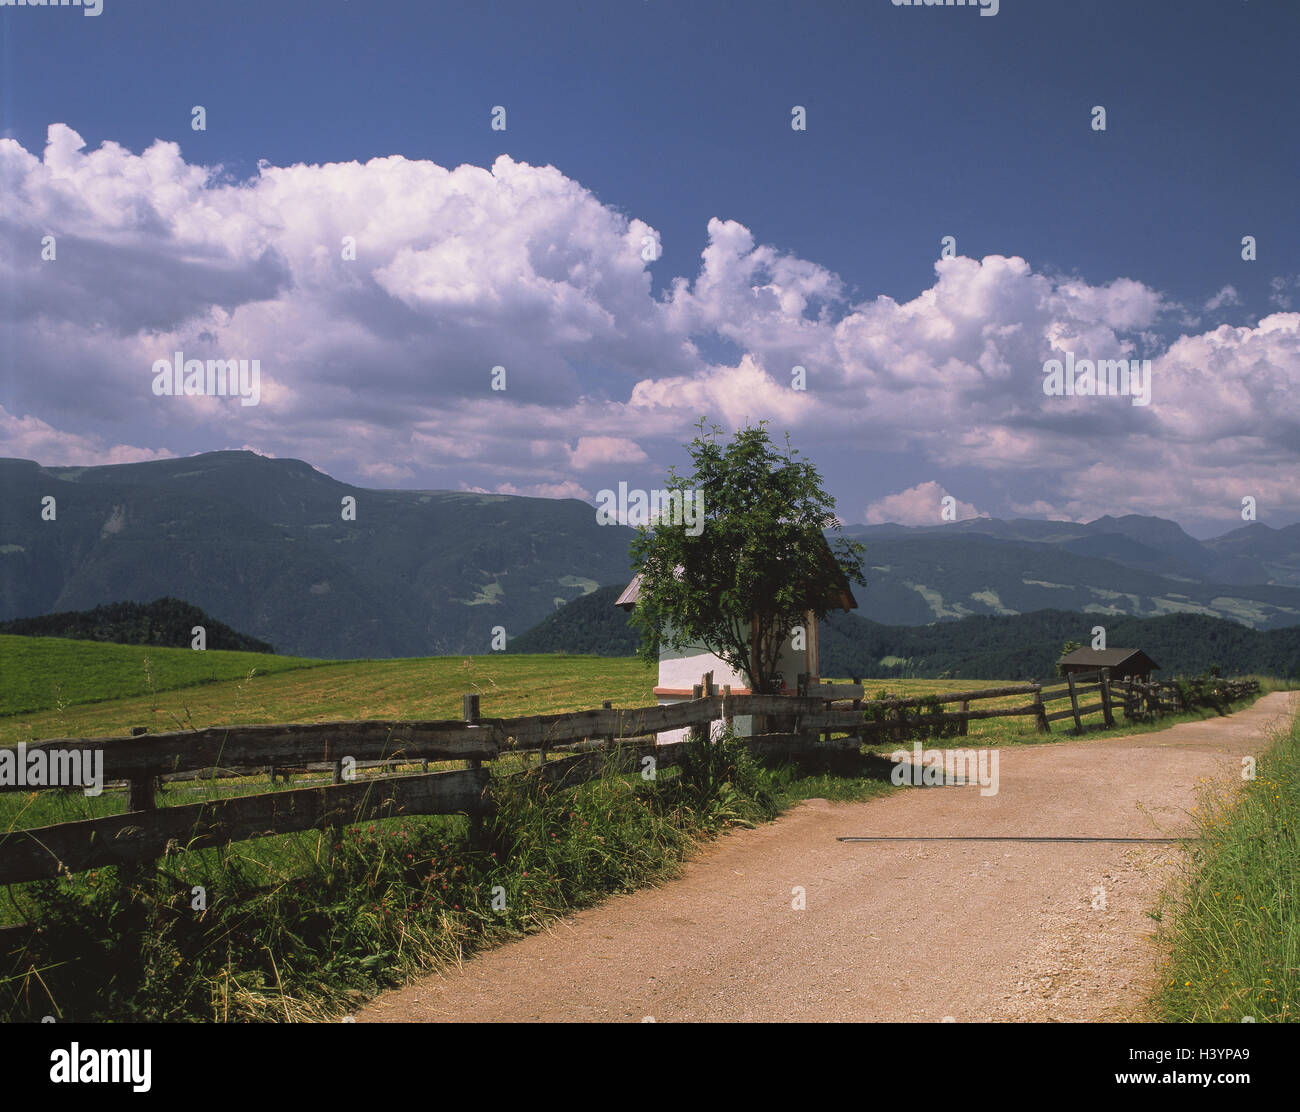 Italy, South Tyrol, Kastelruth, country lane, band, cloudy sky, band, country lane, mountains, fence, meadow, outside Stock Photo